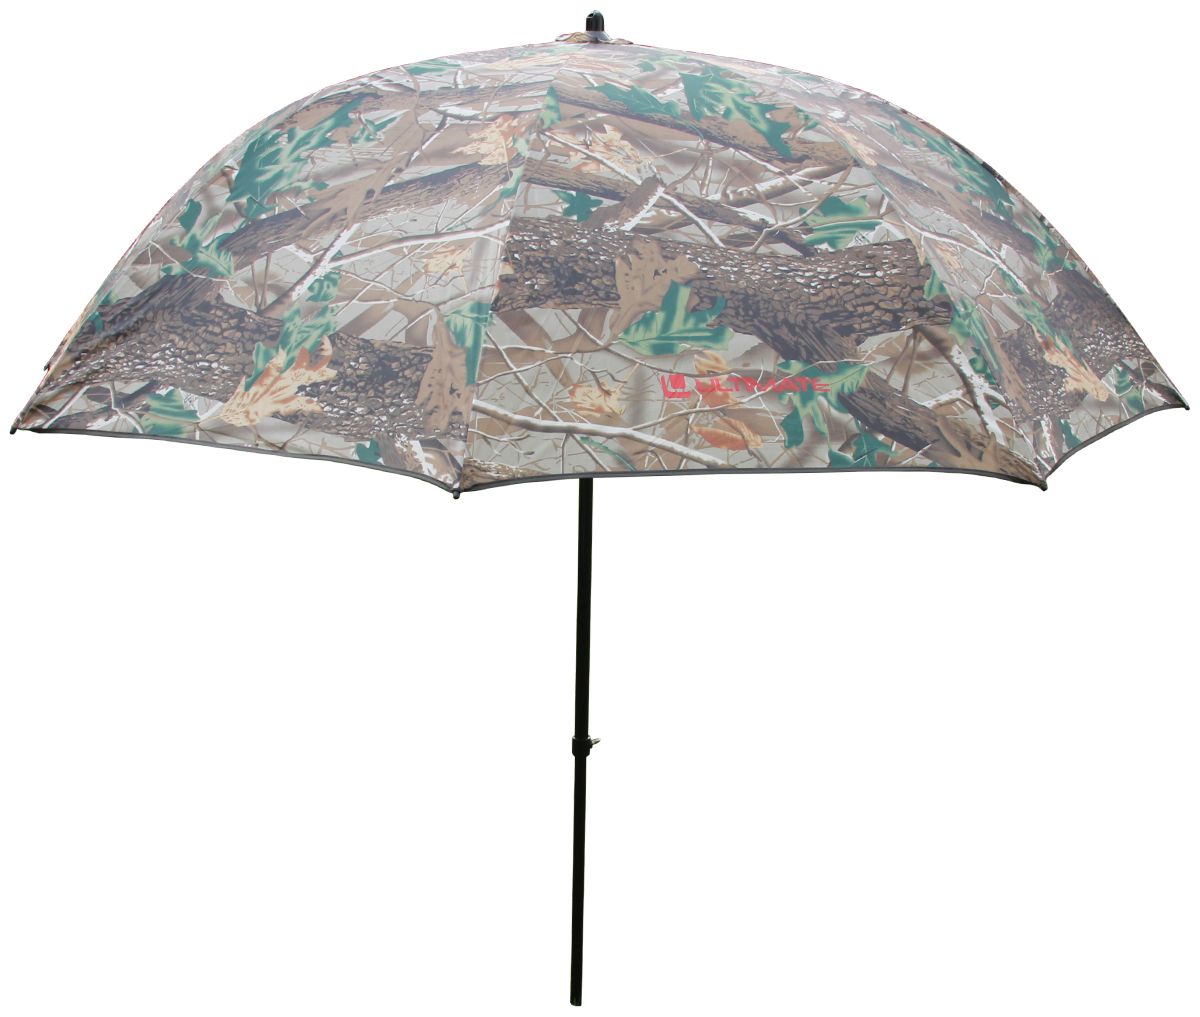 Ultimate Umbrella Camo With Tilt Function 45"